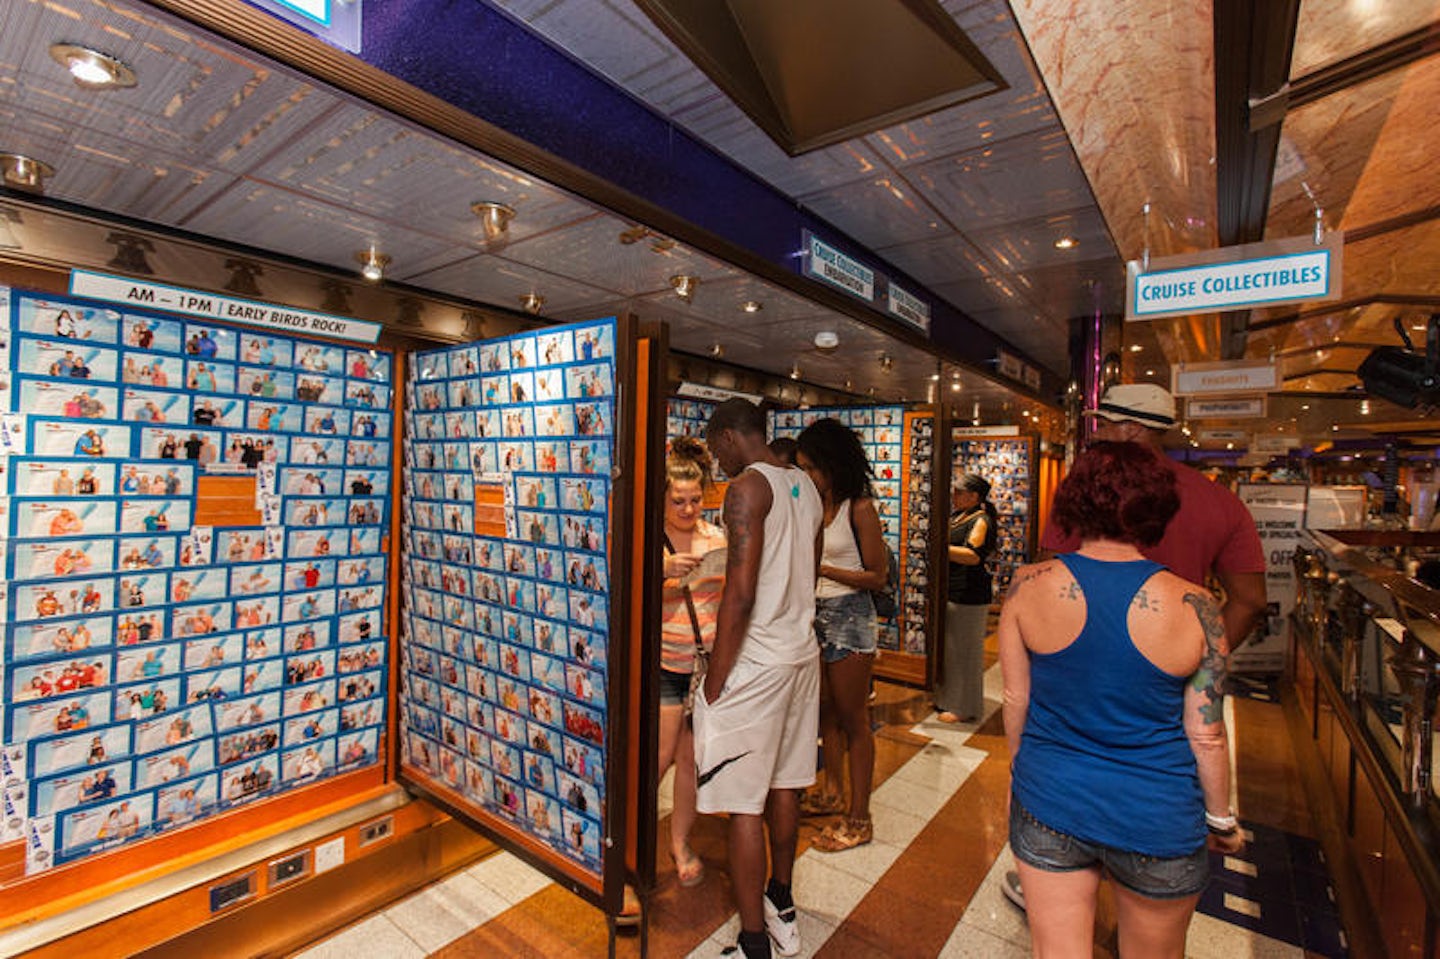 Photo and Video Gallery on Carnival Valor